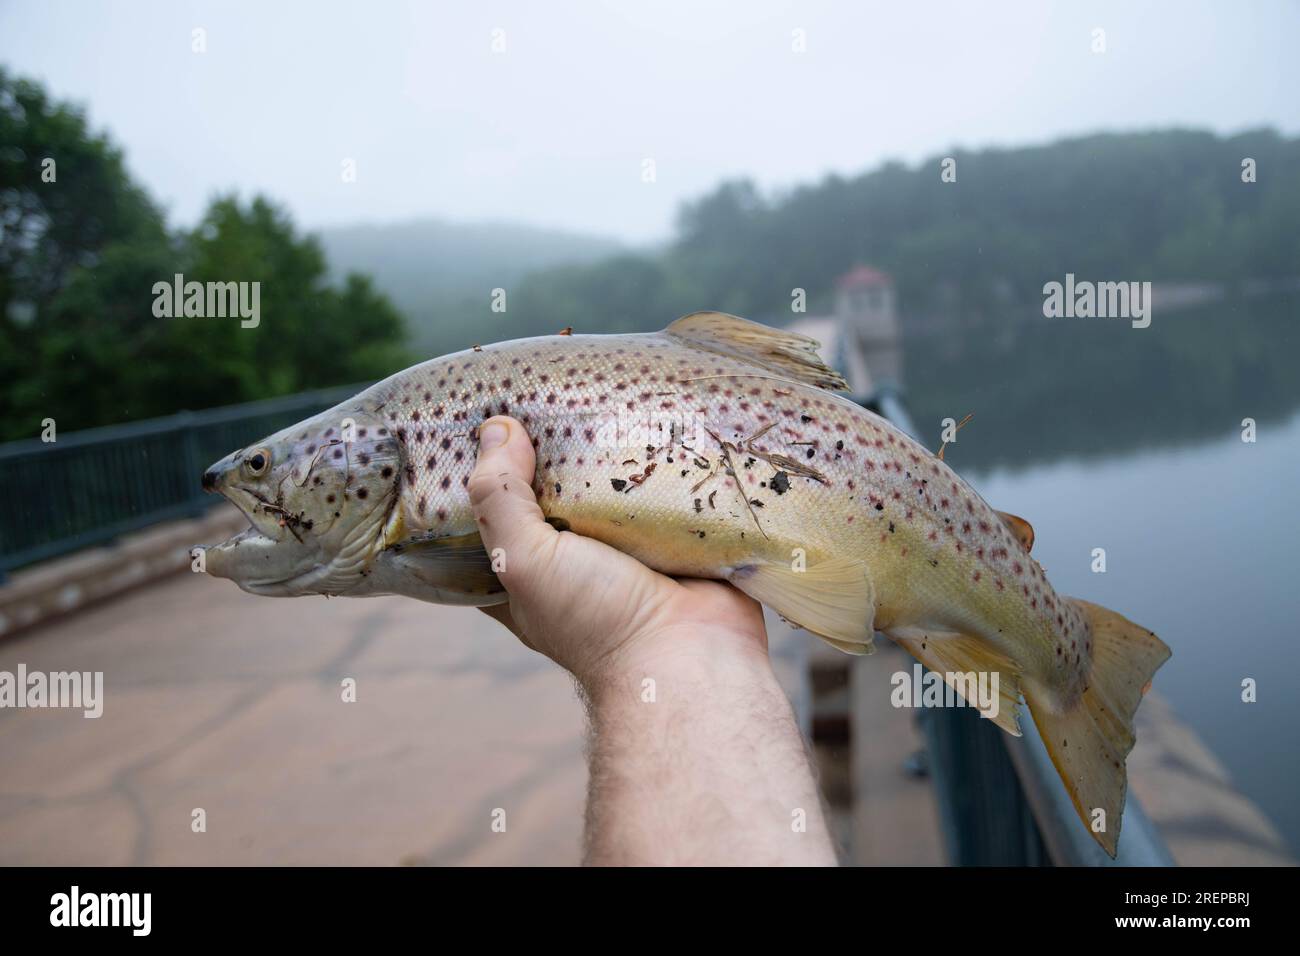 Trout held in hand nice catch fresh water fishing, copy space image Stock Photo